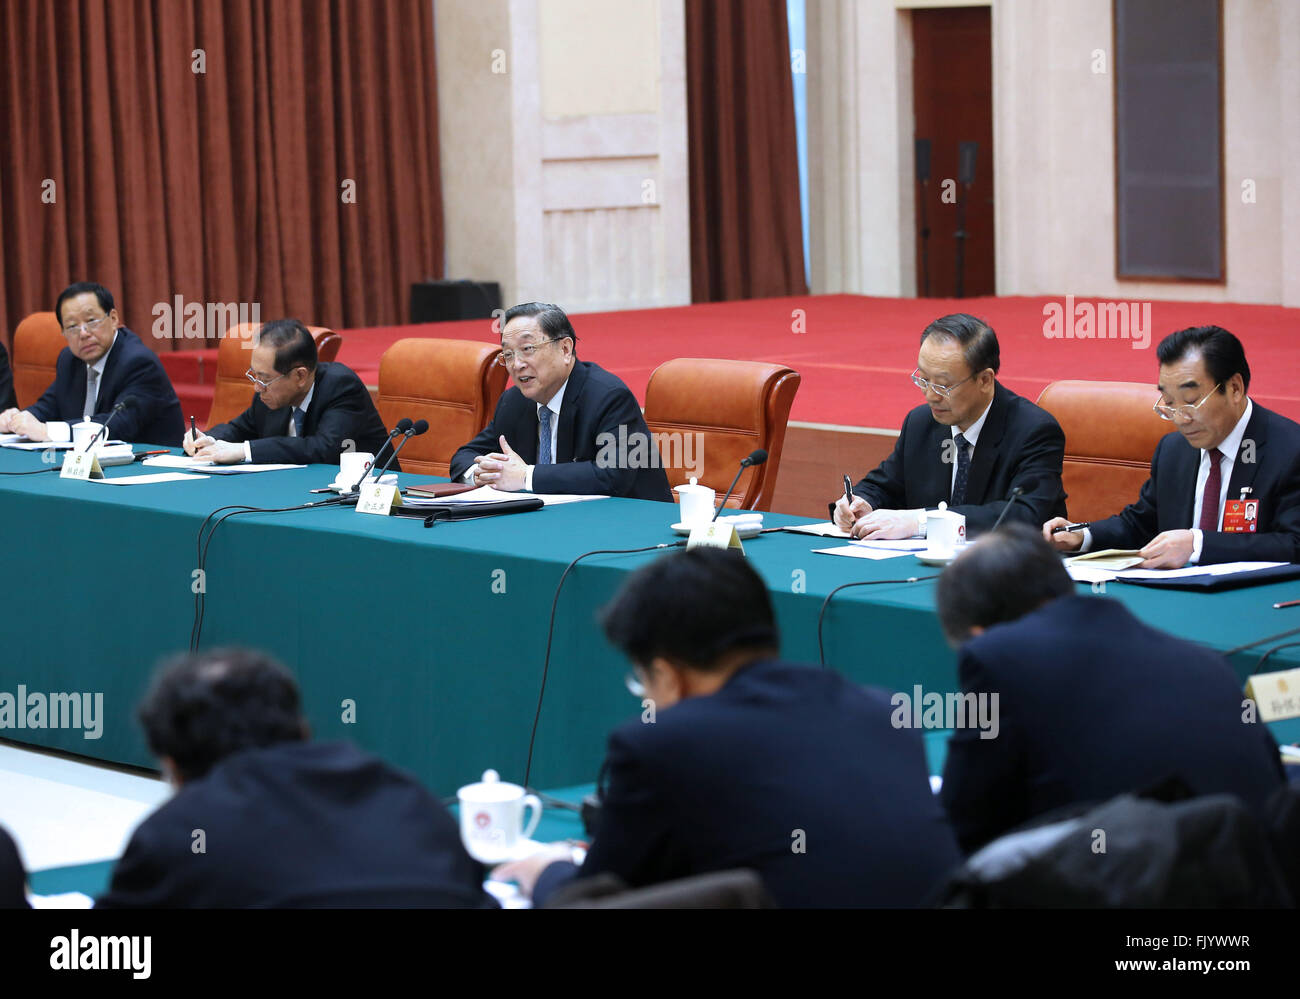 Beijing, China. 4th Mar, 2016. Yu Zhengsheng (3rd L), chairman of the National Committee of the Chinese People's Political Consultative Conference, joins a panel discussion with political advisors from medical and health care sector during the ongoing annual session of the country's top political advisory body in Beijing, capital of China, March 4, 2016. © Pang Xinglei/Xinhua/Alamy Live News Stock Photo